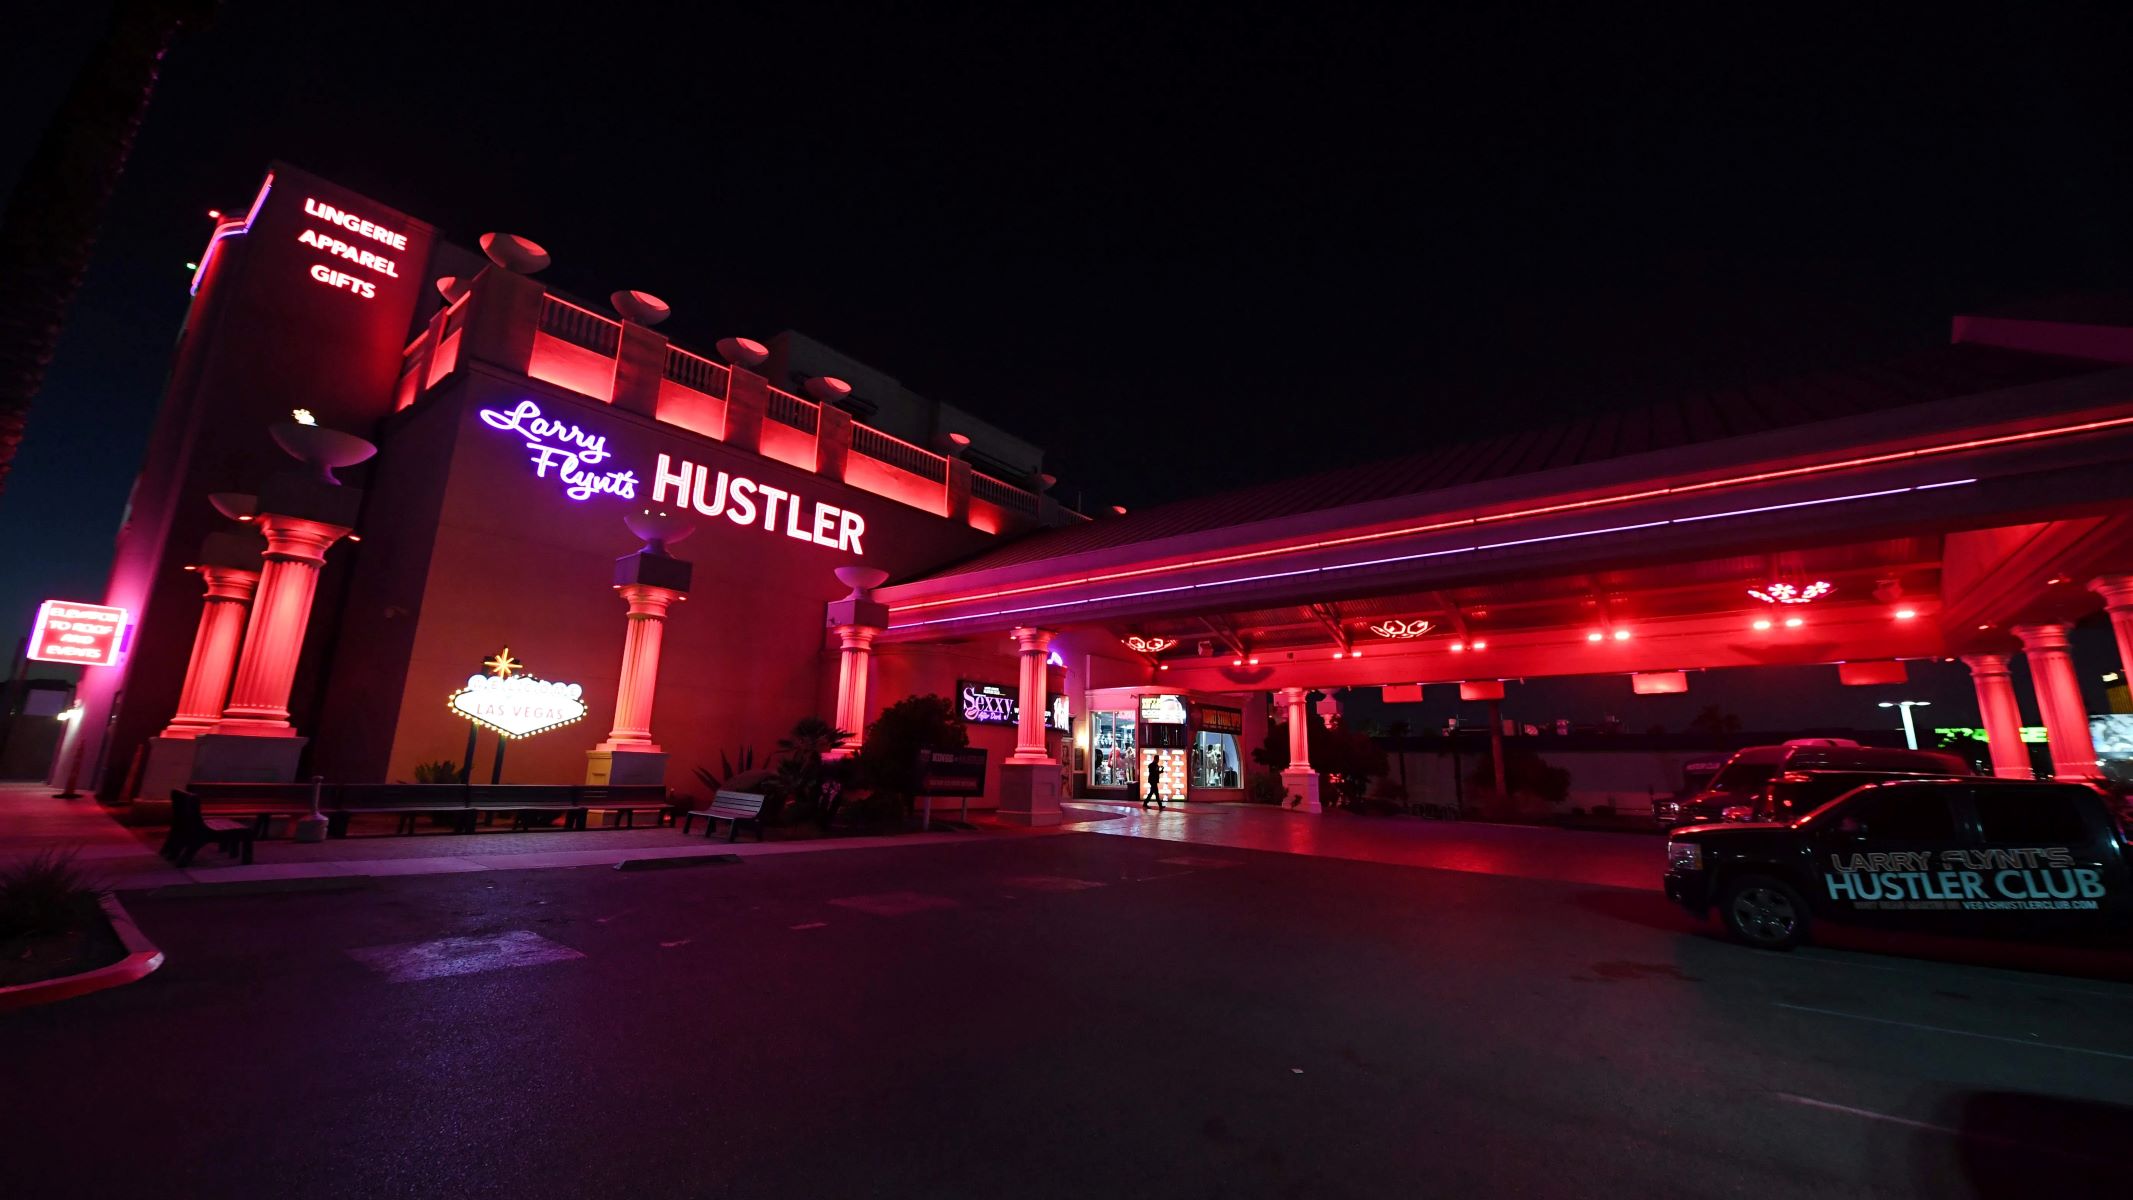 larry-flynts-hustler-club-offers-free-lap-dances-for-mgm-guests-affected-by-cyberattack